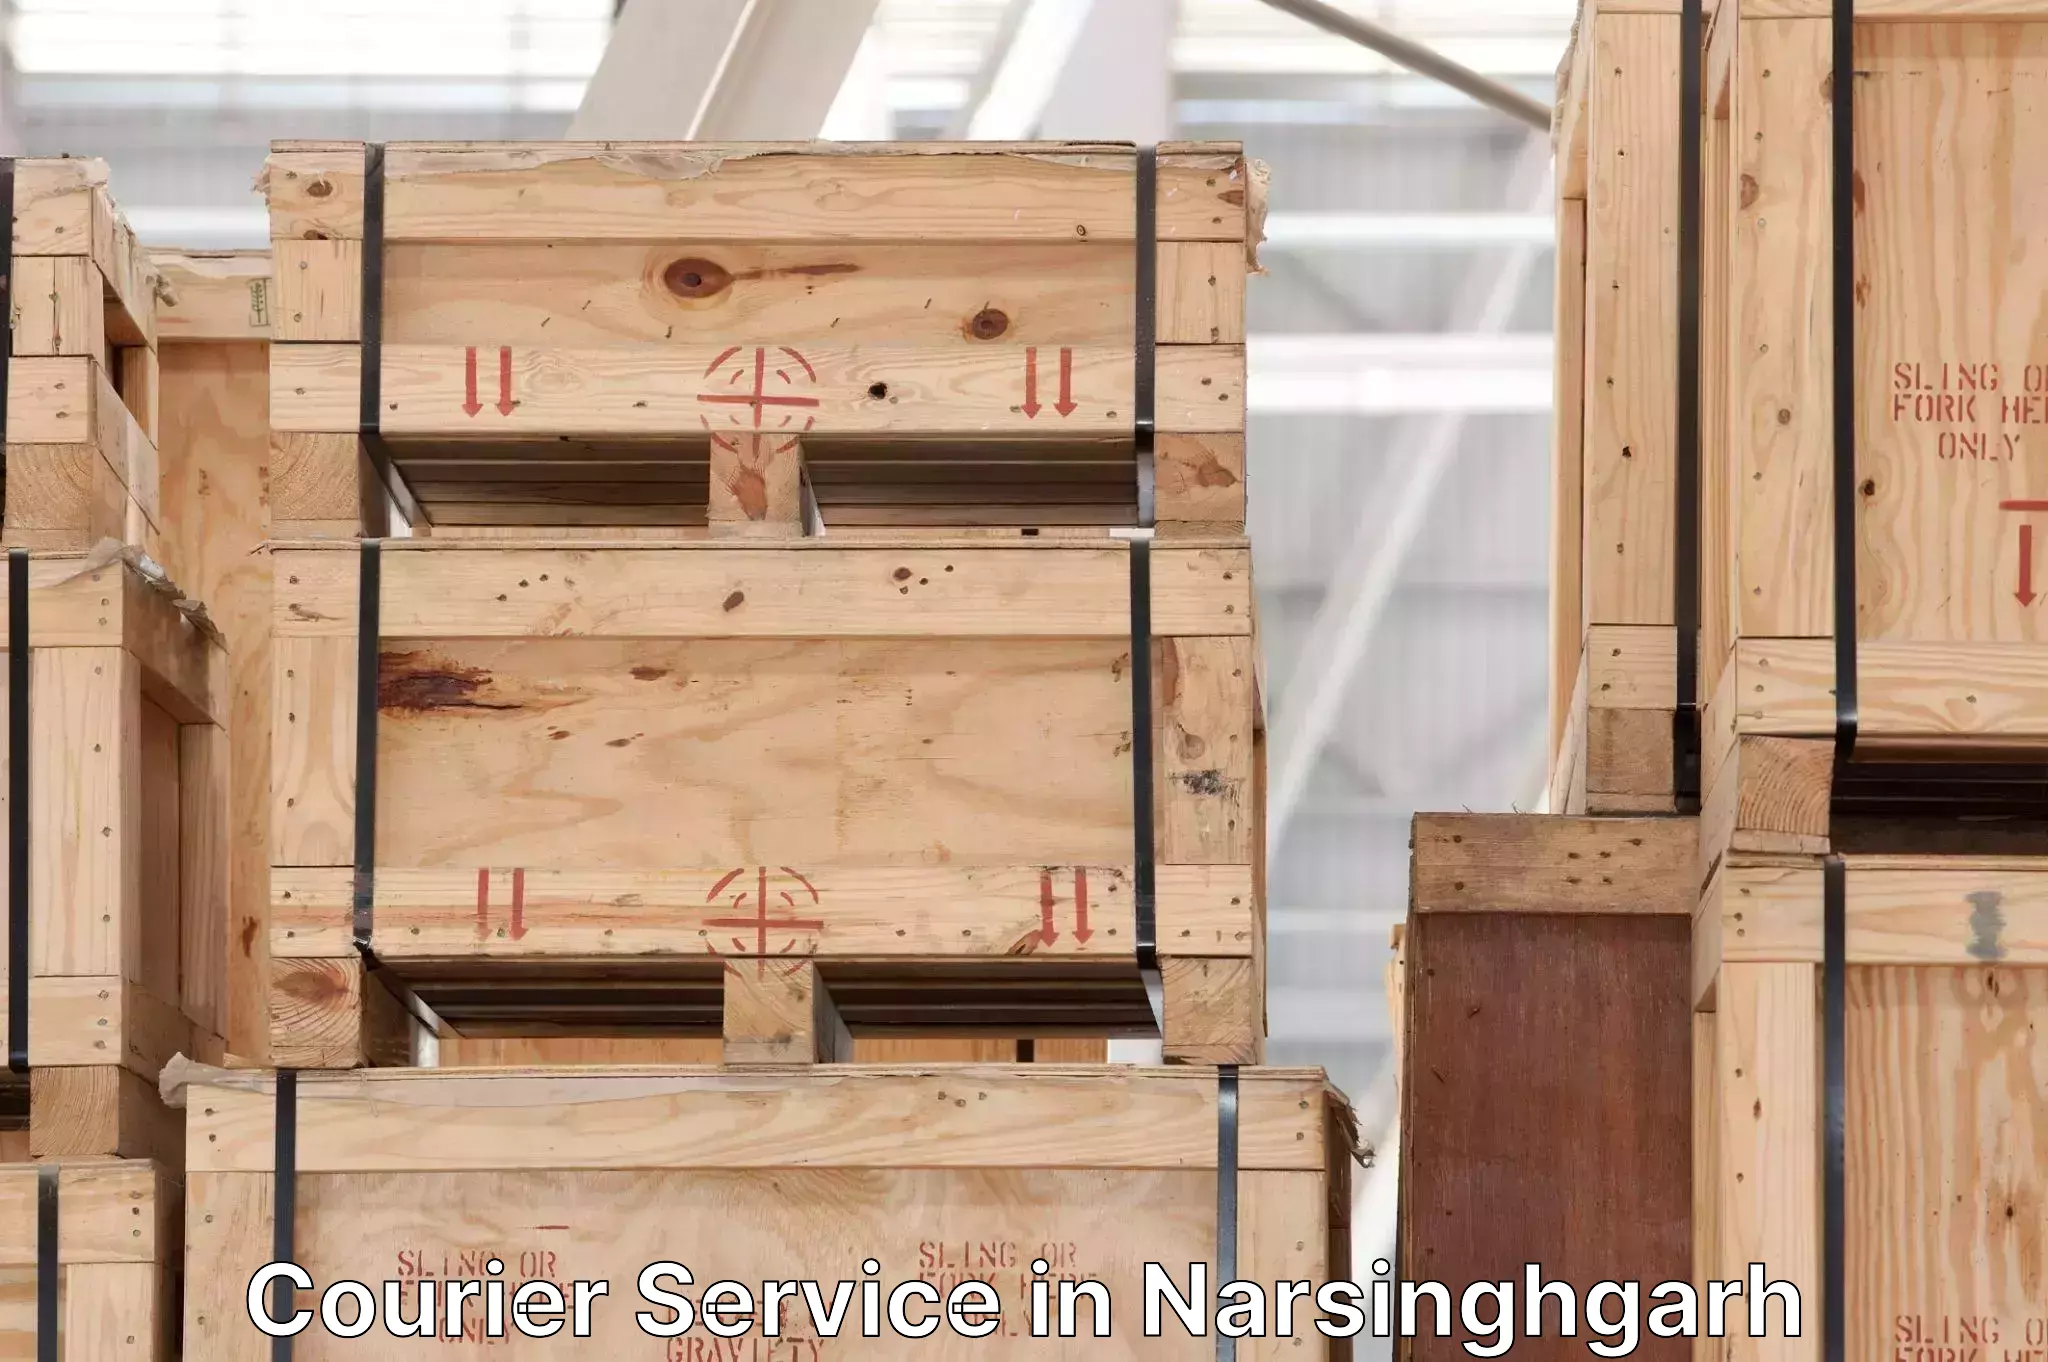 Multi-national courier services in Narsinghgarh